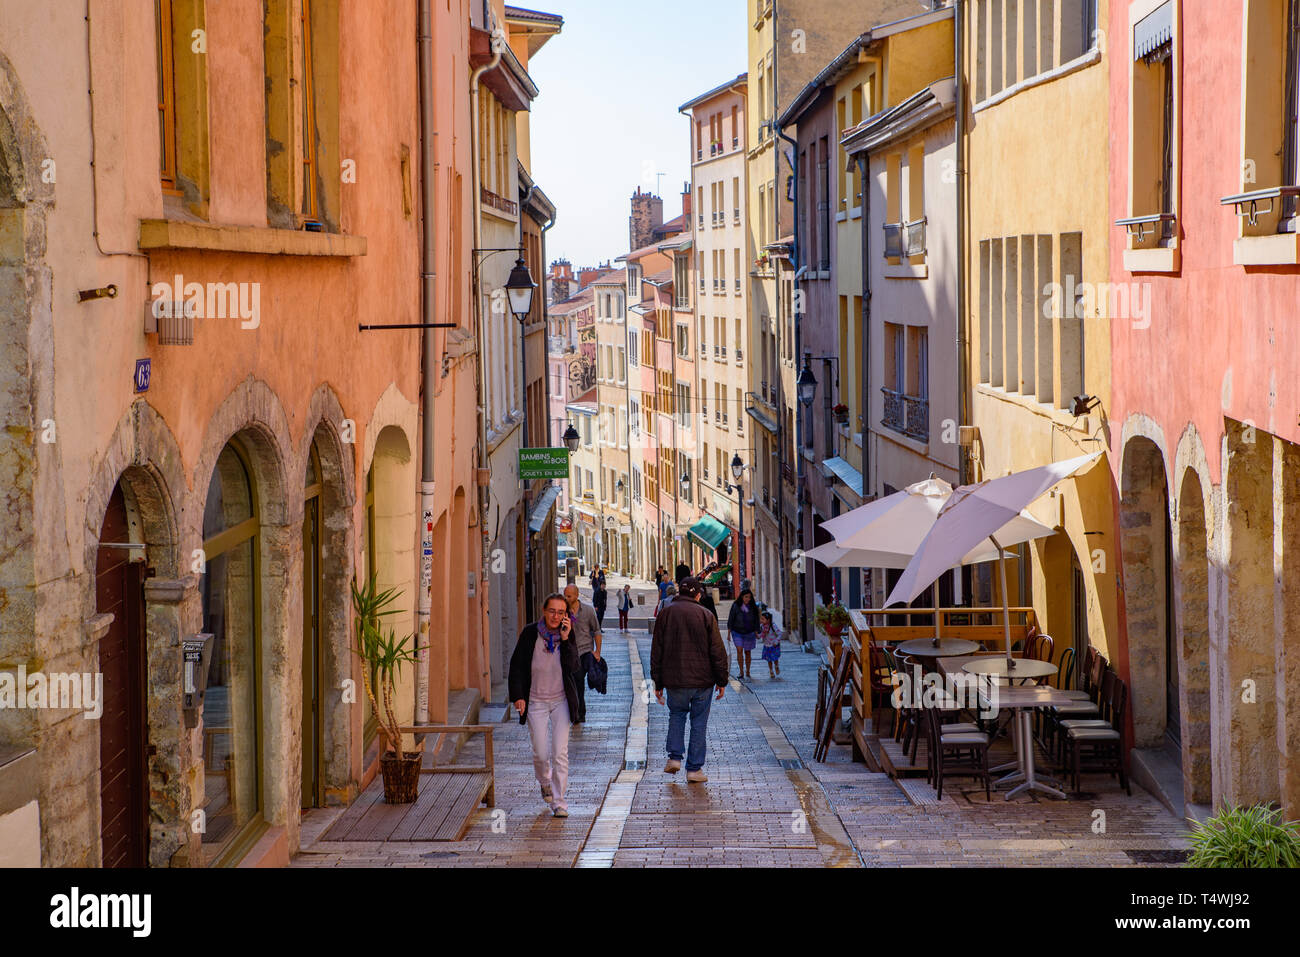 People walking on the street of the Old Town in Lyon, France Stock Photo